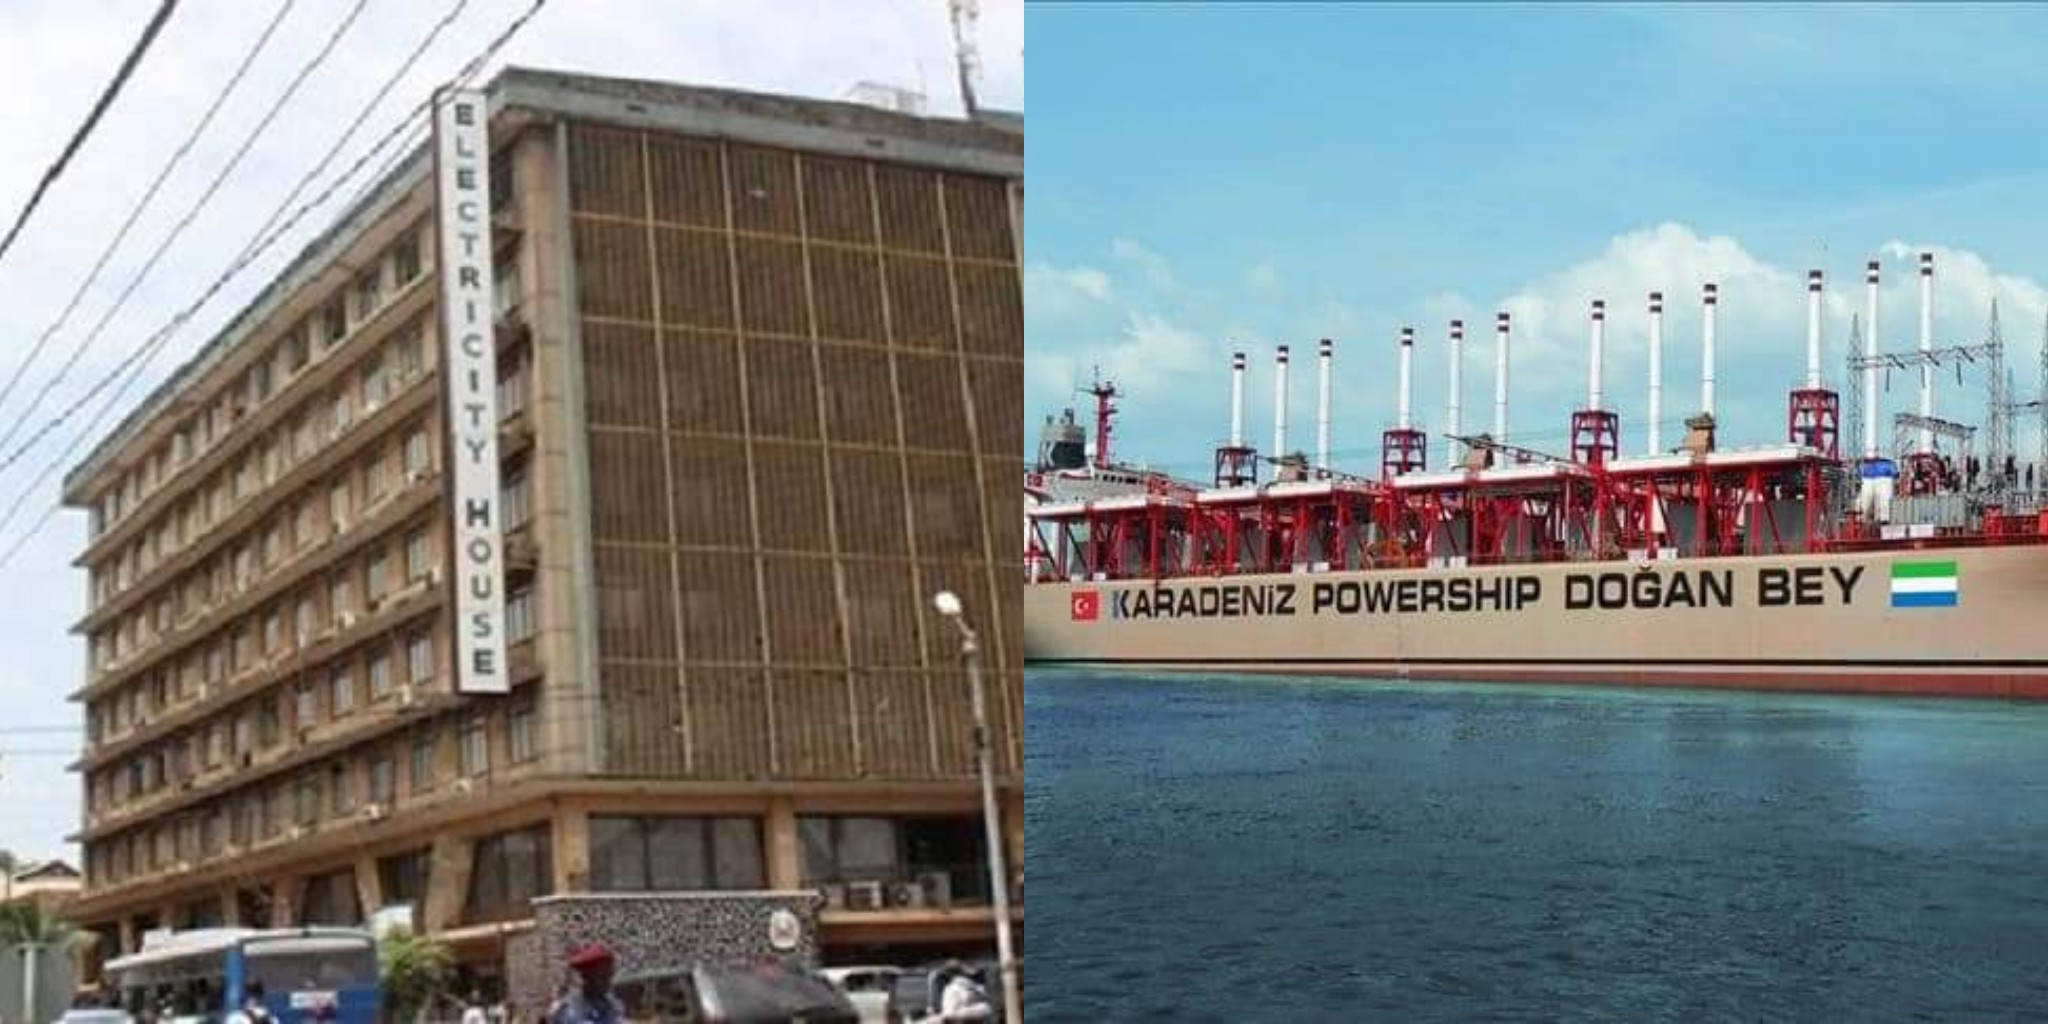 Blackout as EDSA Confirms Technical Problems With Karpowership